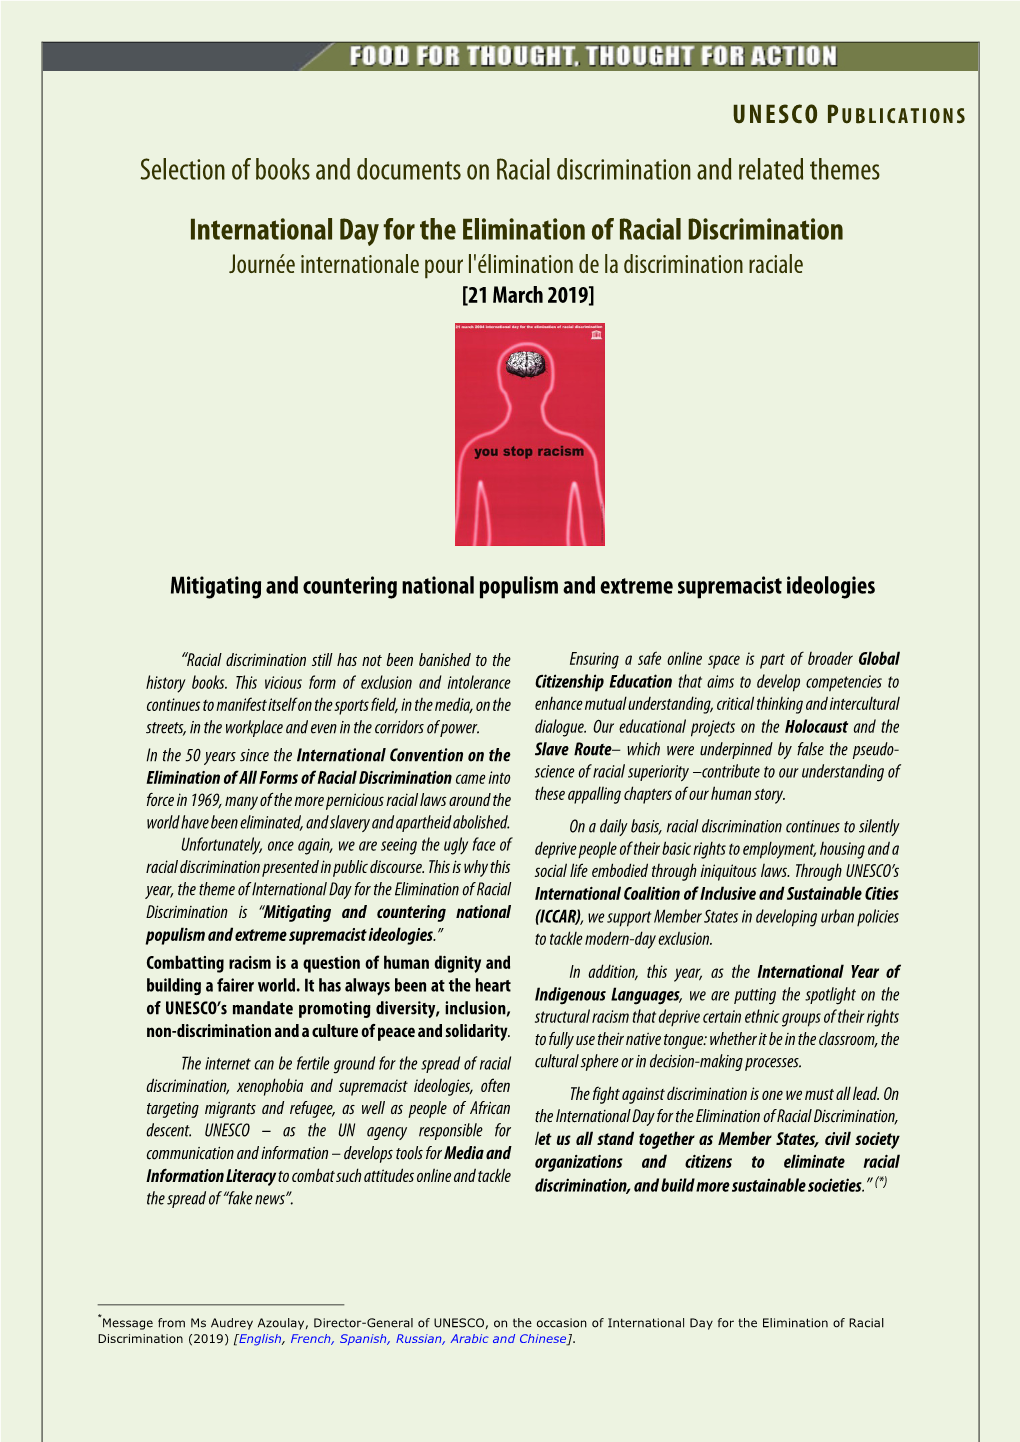 2019 International Day for the Elimination of Racial Discrimination